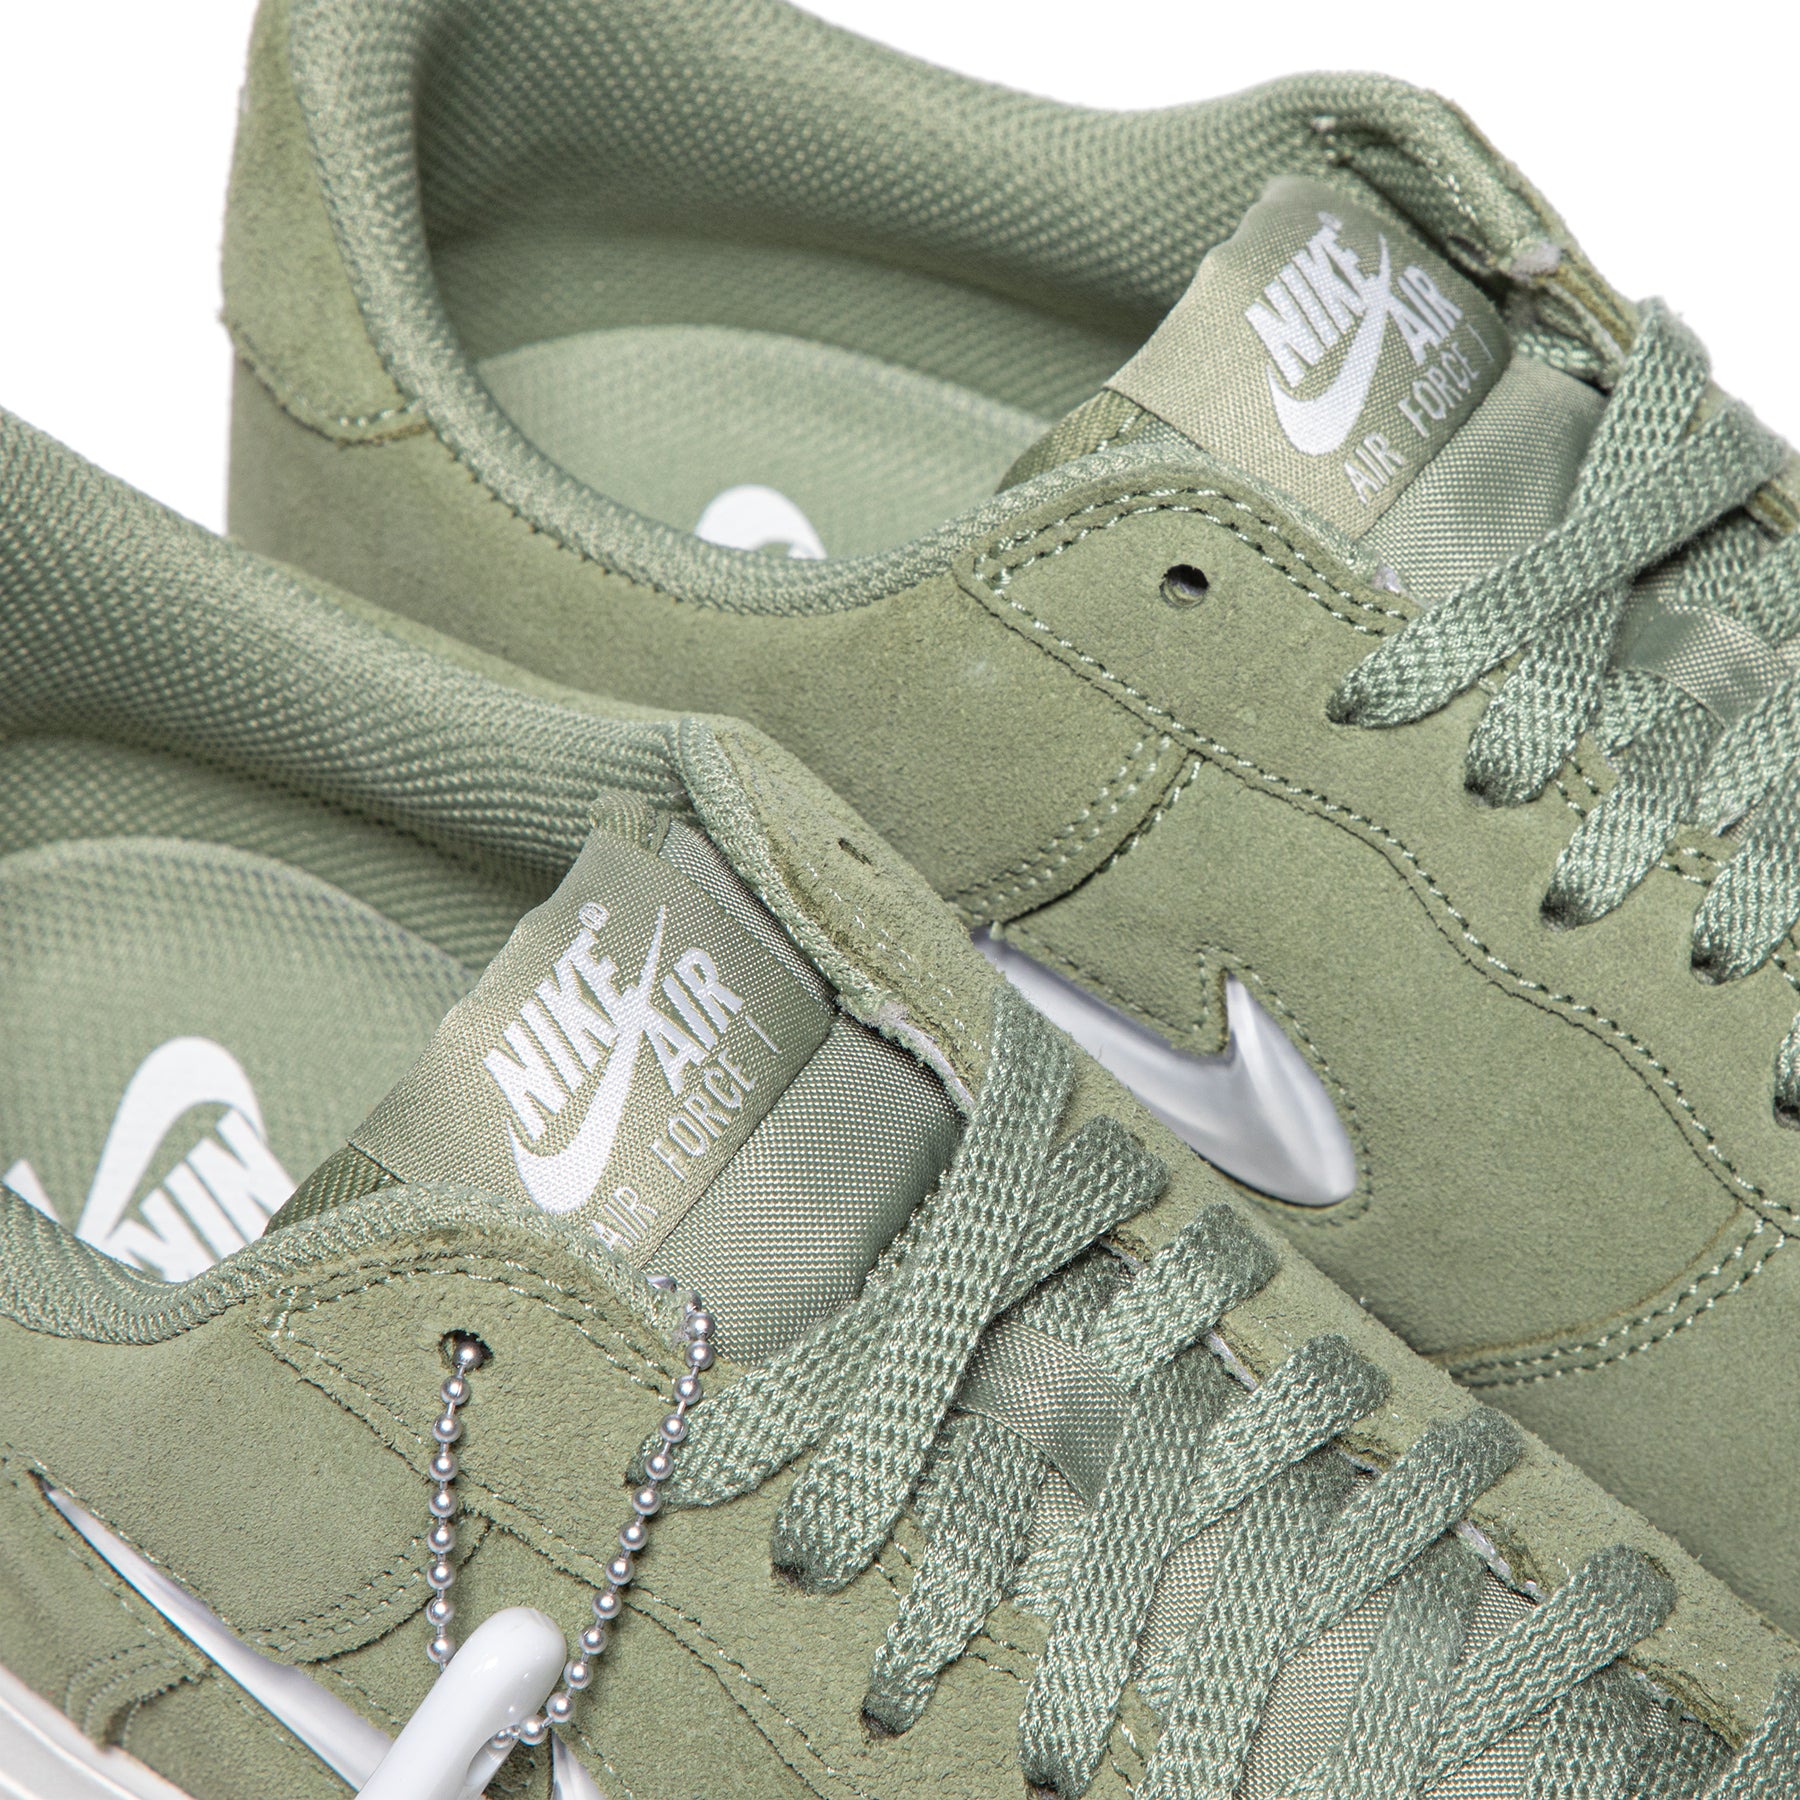 Nike Air Force 1 Low Retro (Oil Green/Summit White) 4